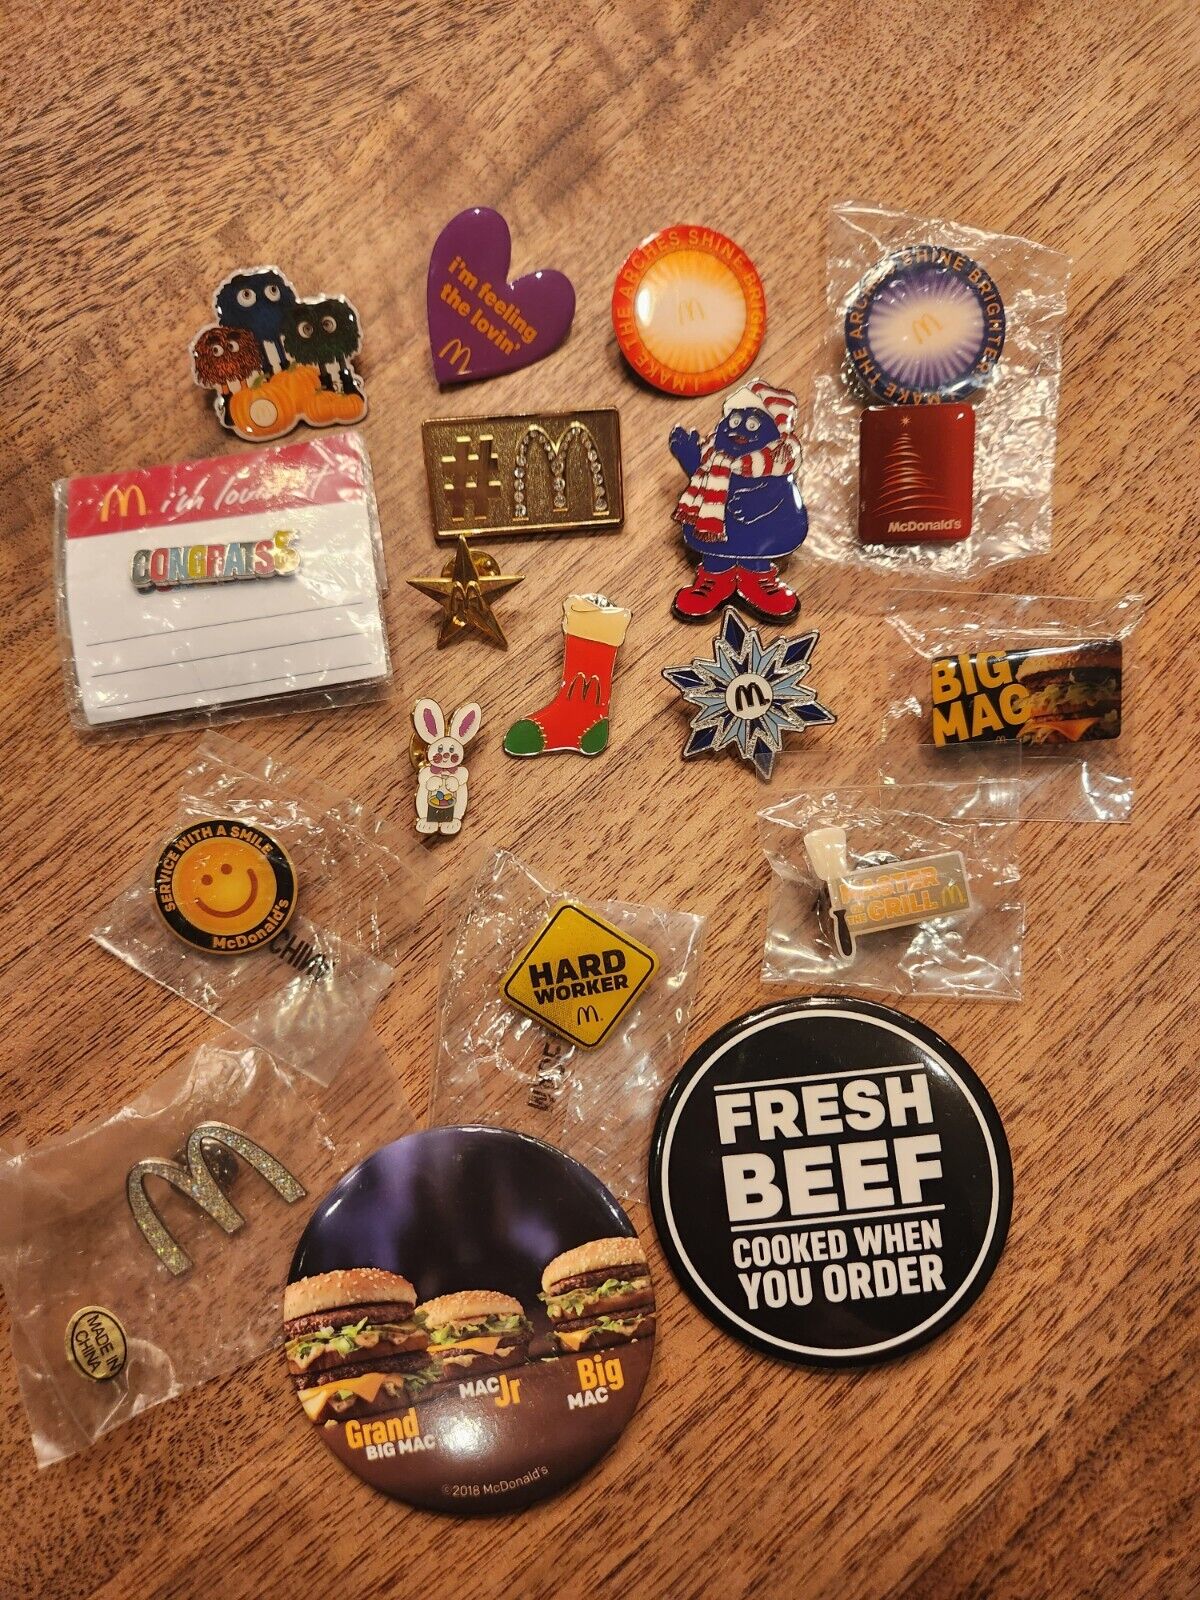 McDonald’s Lapel Pin Button Lot Of 19 Employee Pins New in Package Promo